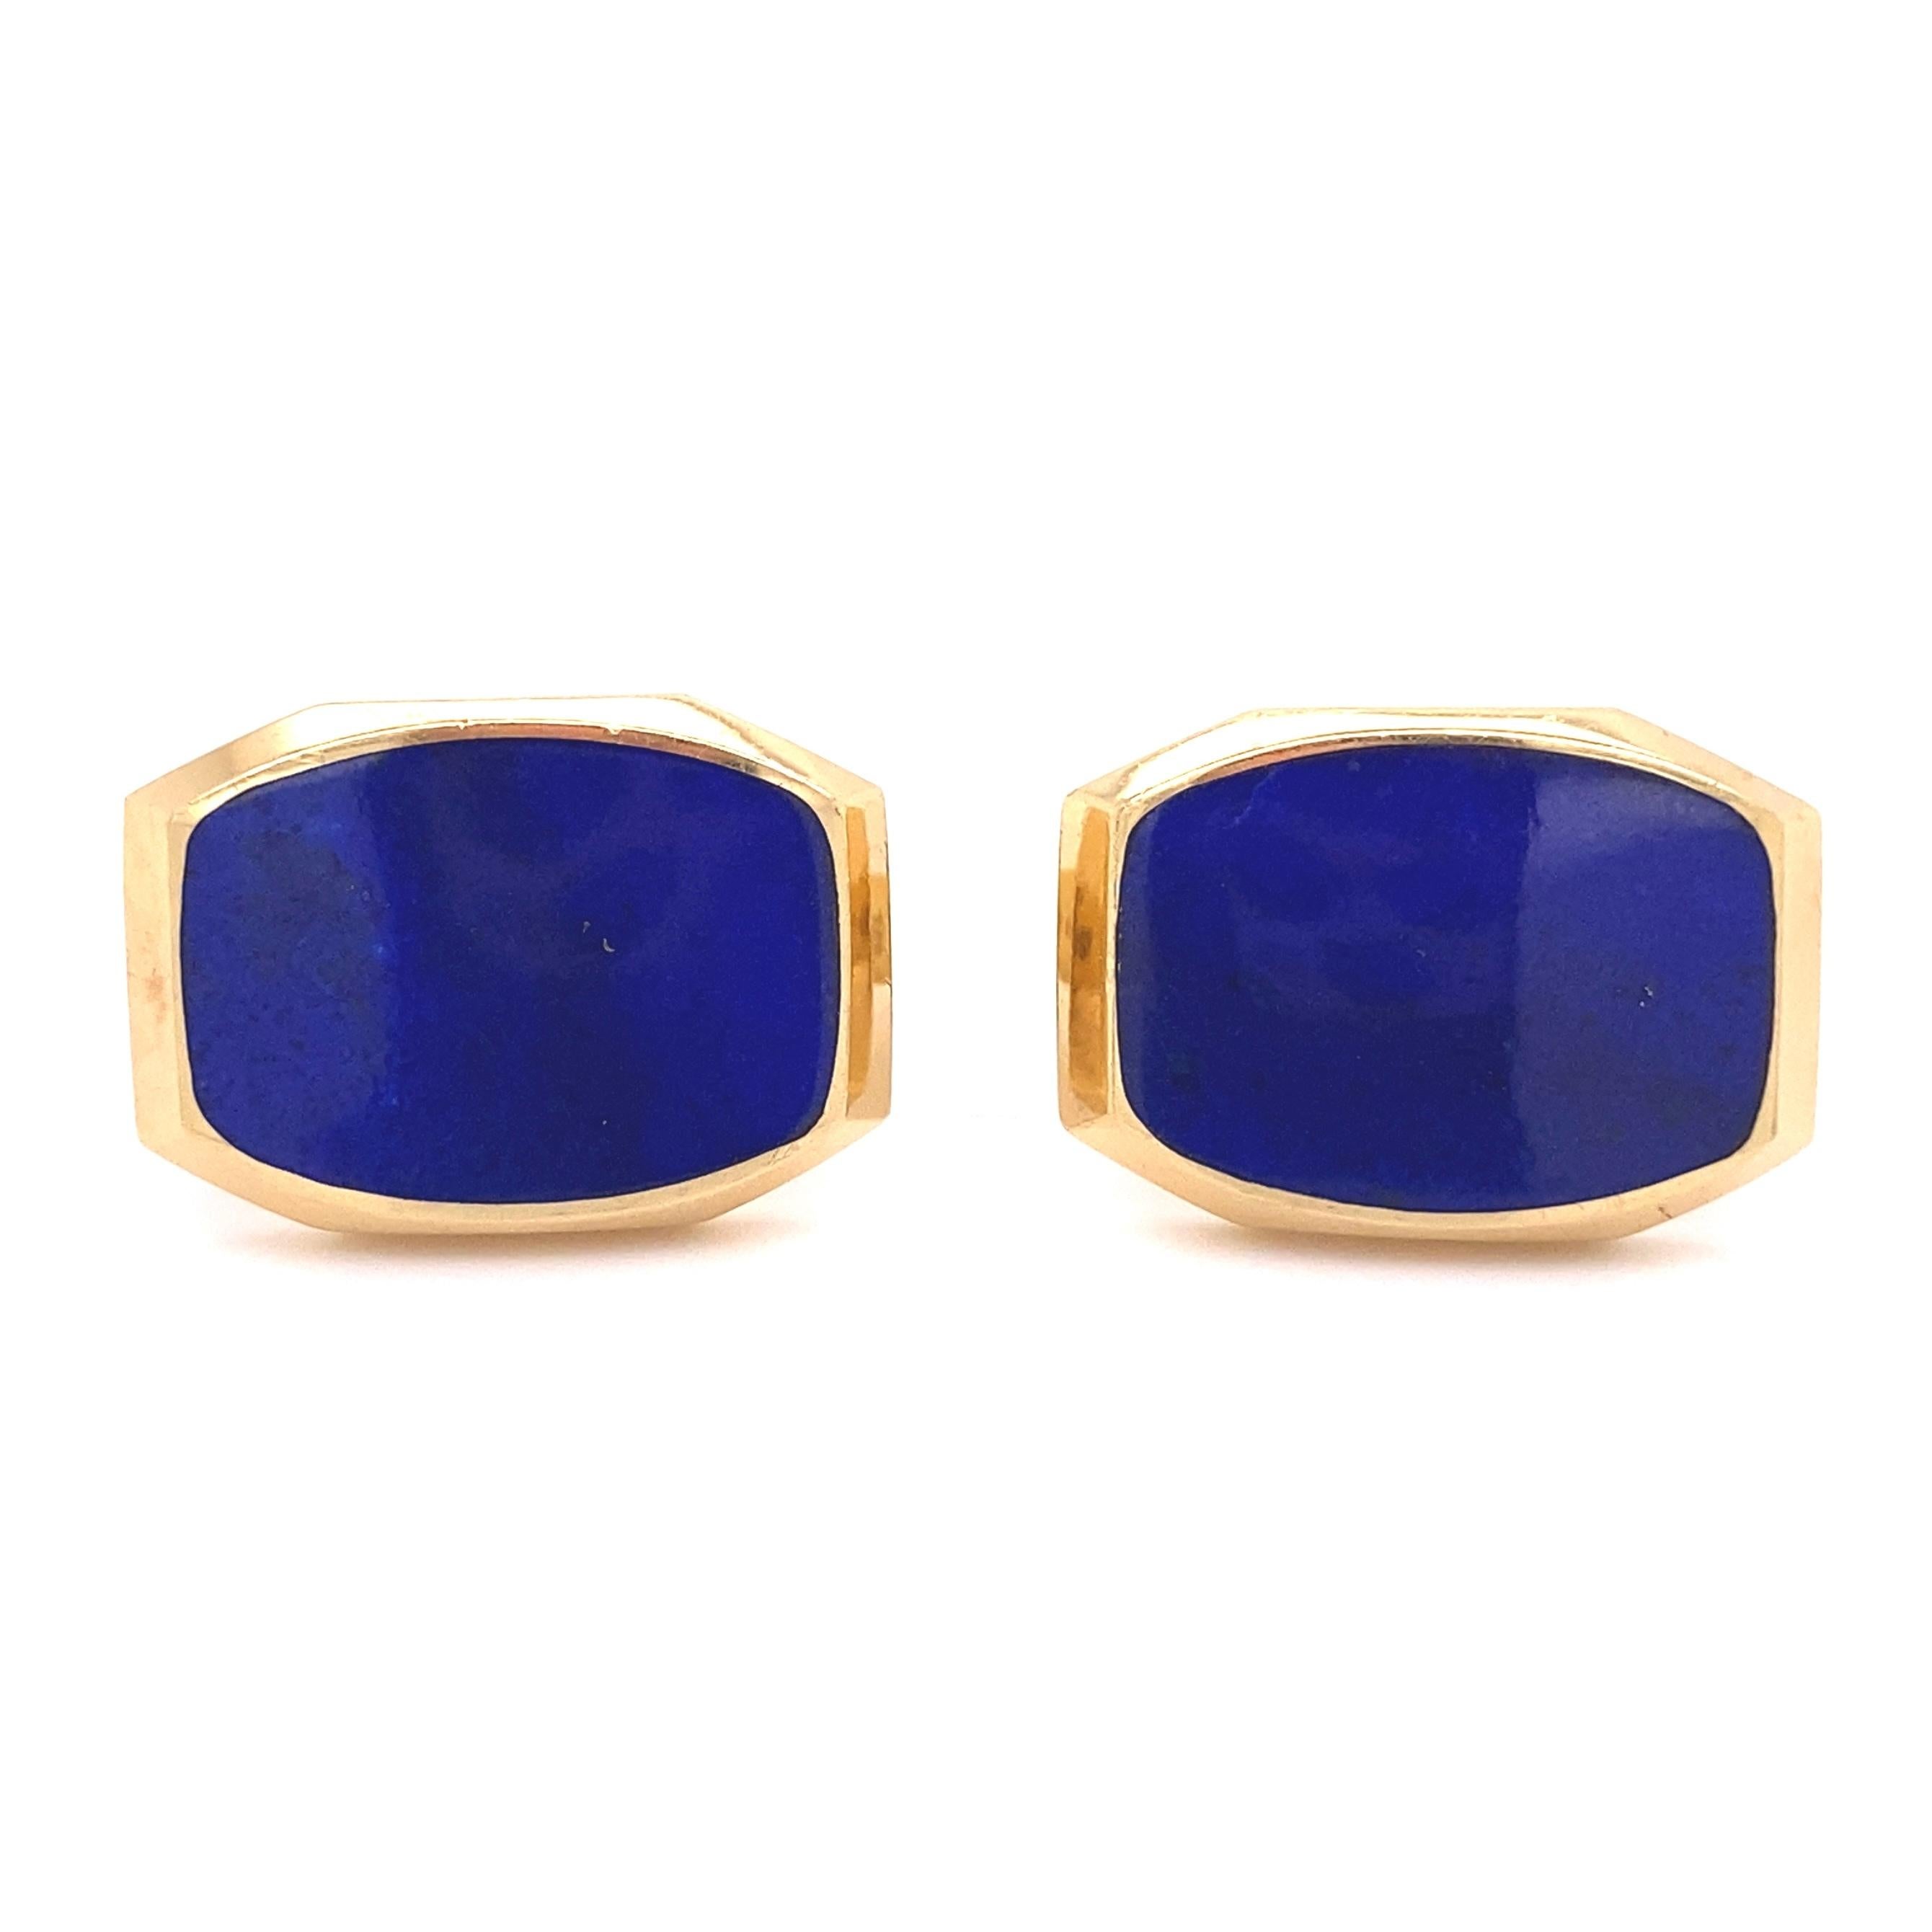 Handsome pair of High Quality Natural Lapis Lazuli Angular Cufflinks, Hand crafted in 14 Karat yellow Gold. Dimensions 0.81”w x 0.57”h x 0.77”d. Signed: KW for KURT WAYNE. Marked: 585 KW 143910 & 143970. In excellent condition, recently